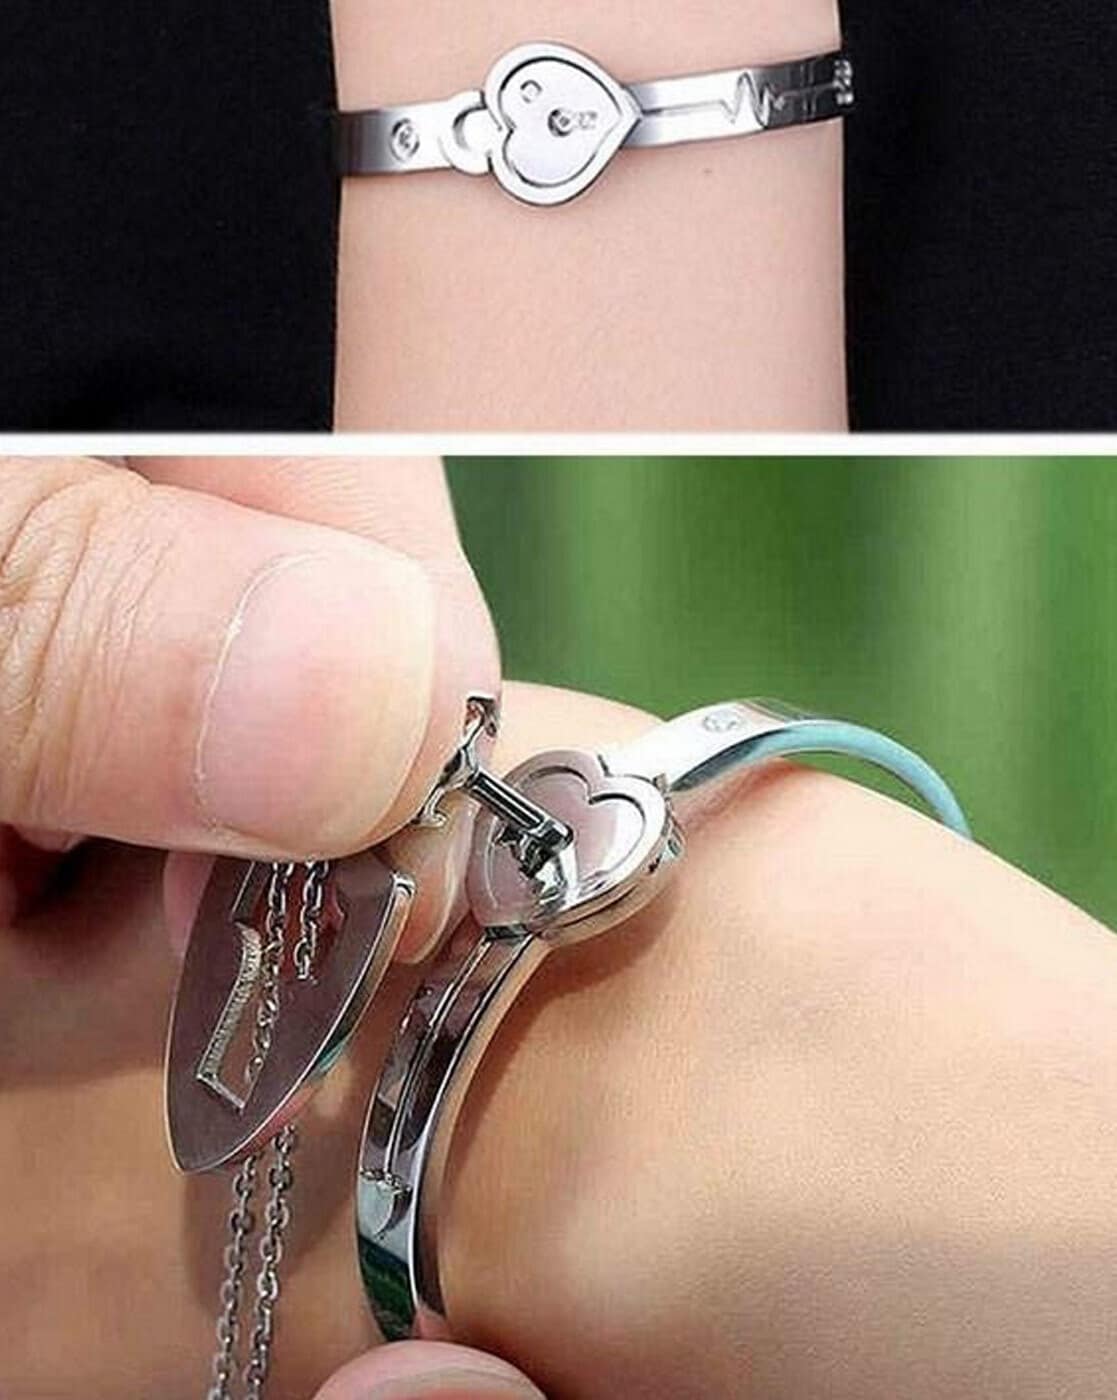 Stainless Steel Love Heart Lock Jewelry Set For Couples Bracelets, Bangles,  Key Pendant And Earring Set Perfect Valentines Day Gift Couples3266 From  Qytyo, $19.33 | DHgate.Com